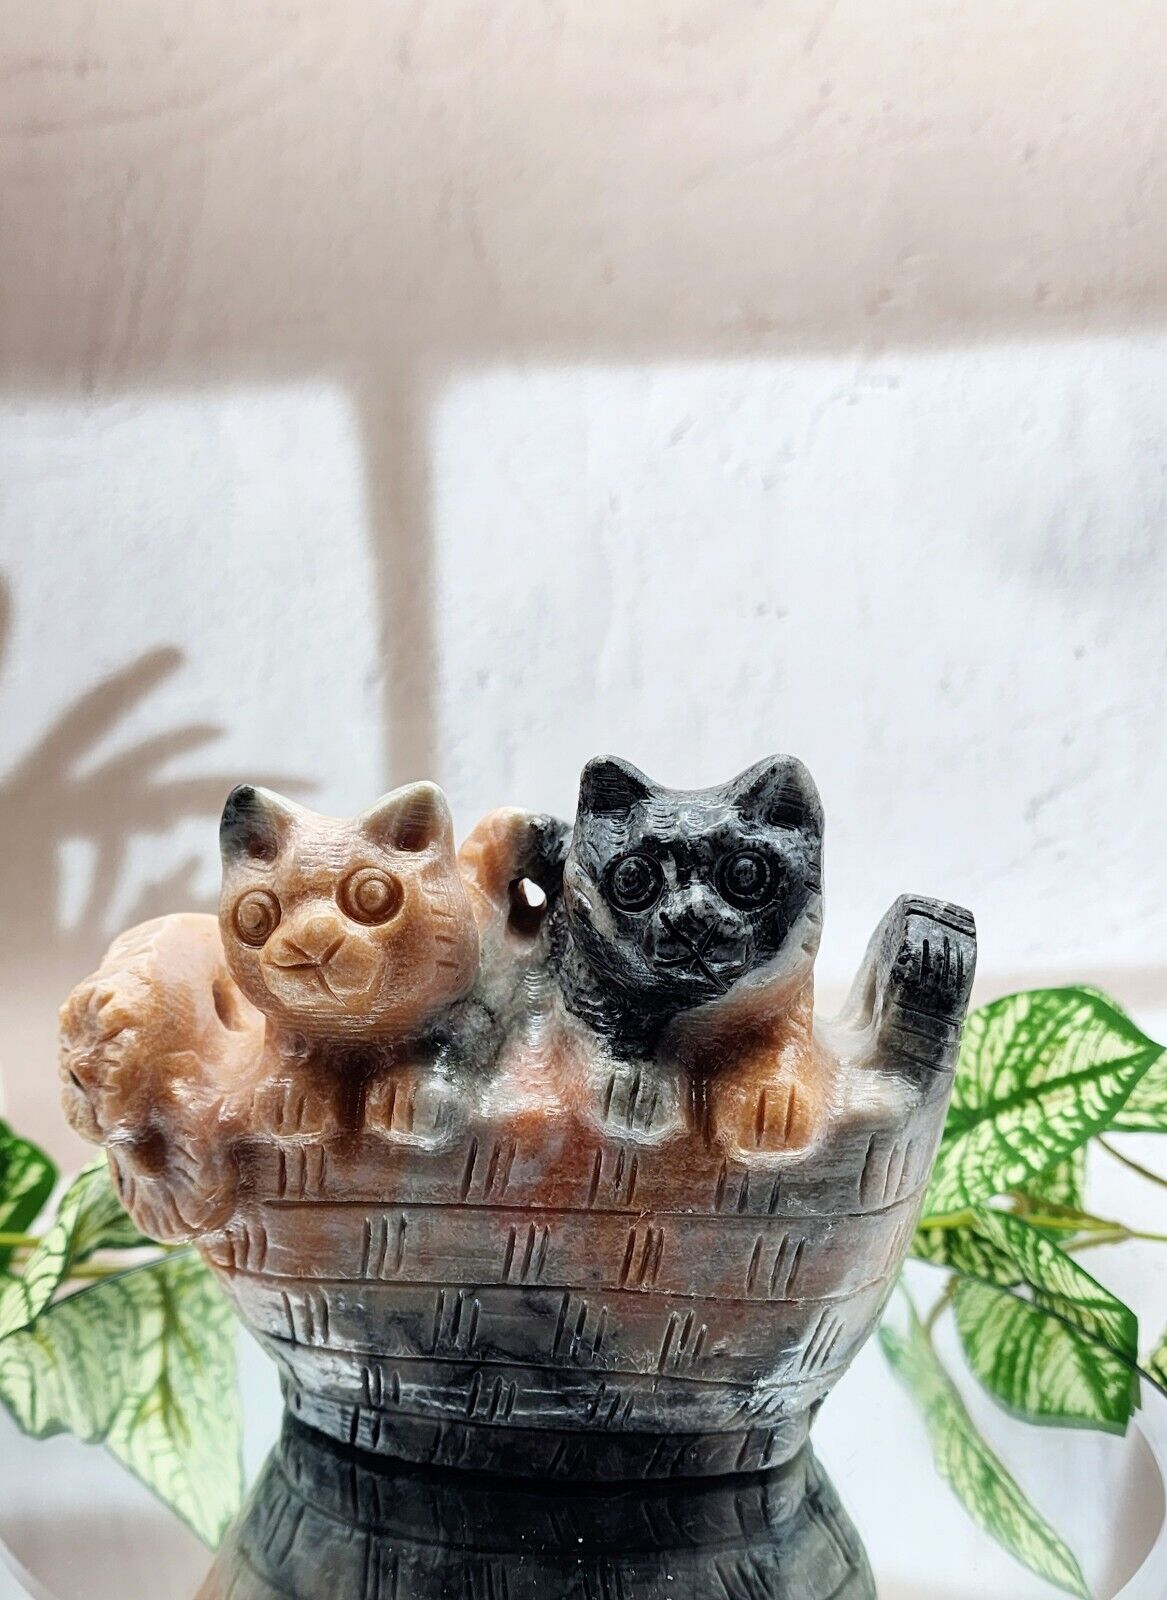 Sunstone Kittens In Basket, Cat Gemstone Carving, Hand Carved Crystal Cats 